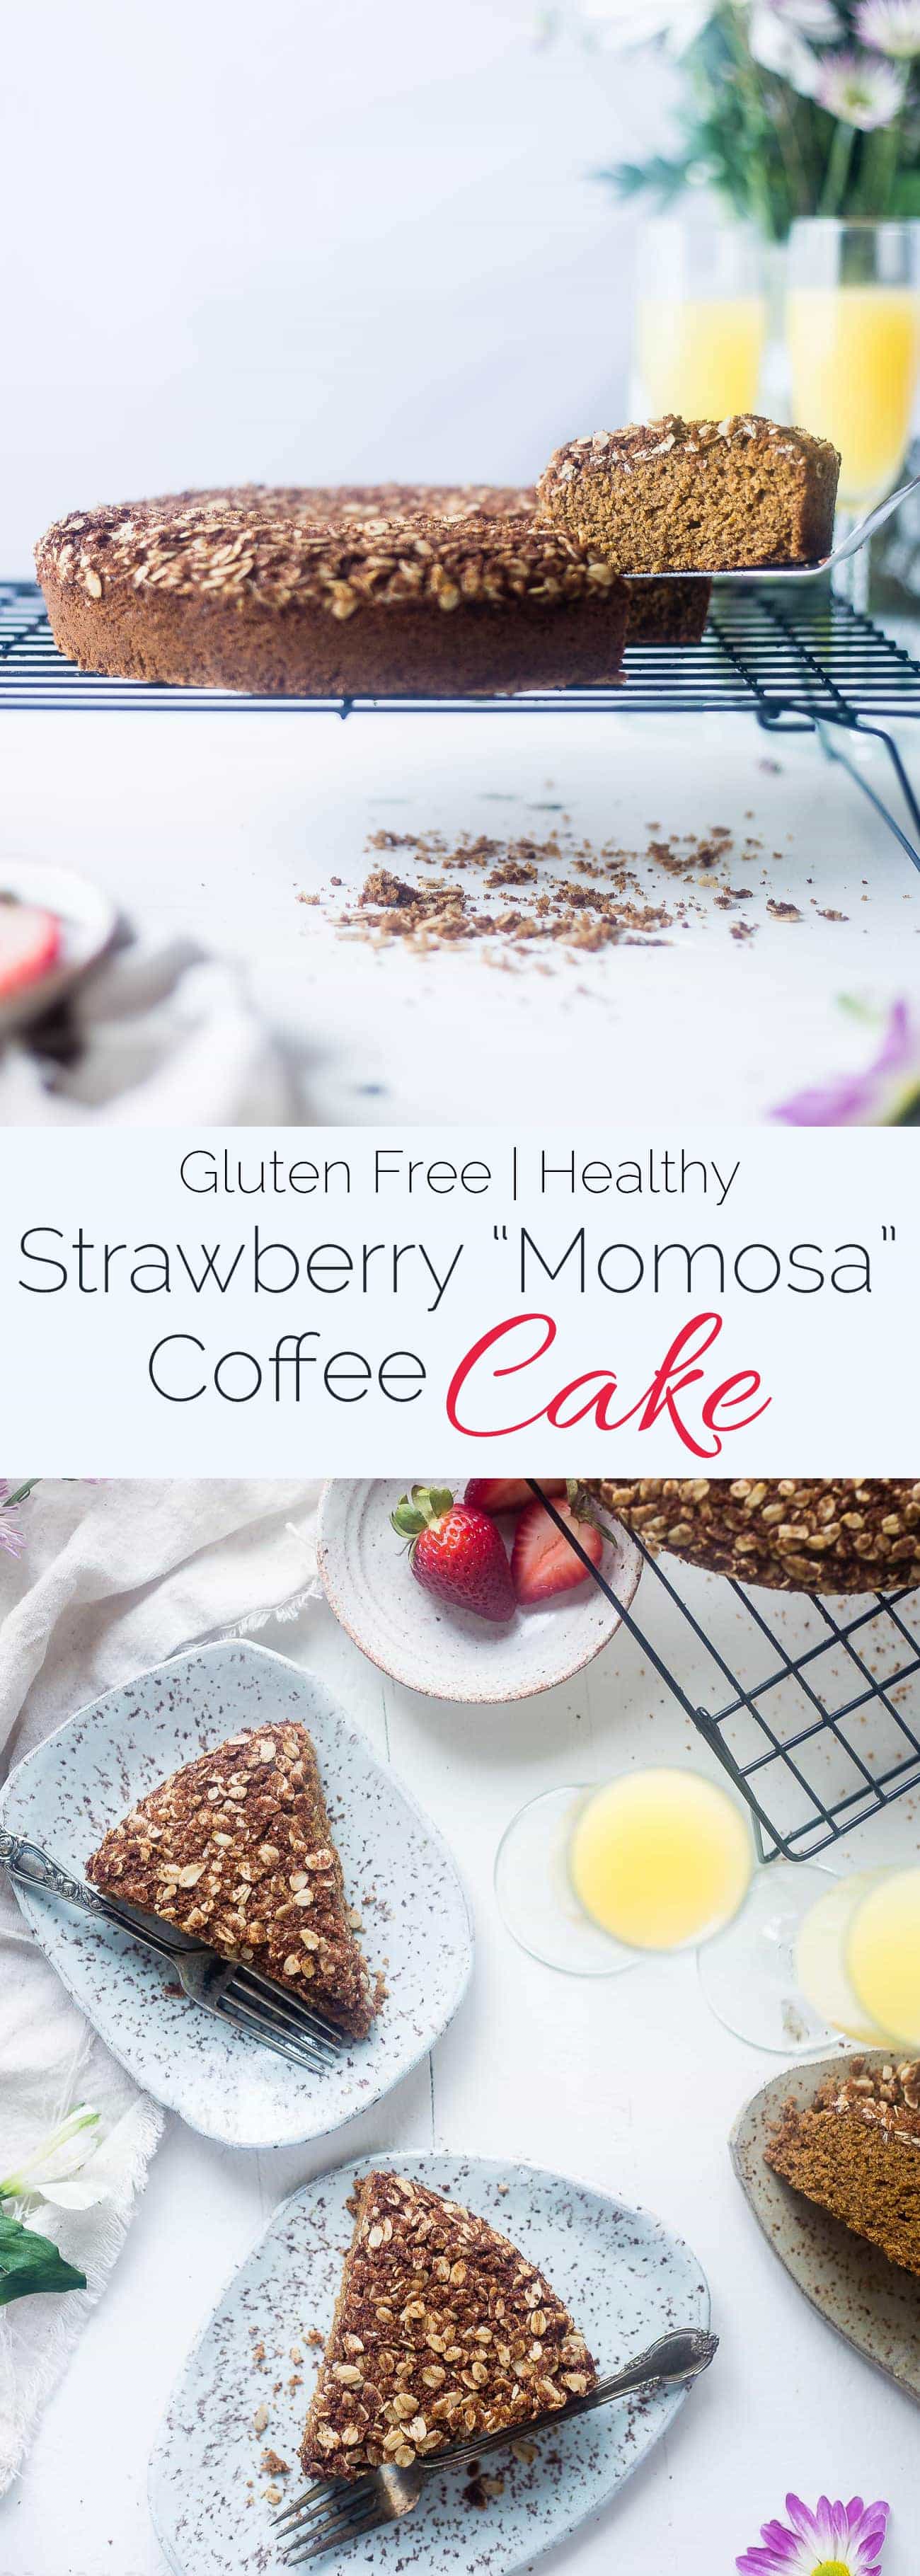 Strawberry Momosa Gluten Free Coffee Cake - This coffee cake tastes like a mimosa and is perfect for Spring brunch or Mother's Day! It's so moist and tender that you'd never know it's healthy and gluten free! | Foodfaithfitness.com | @FoodFaithFit